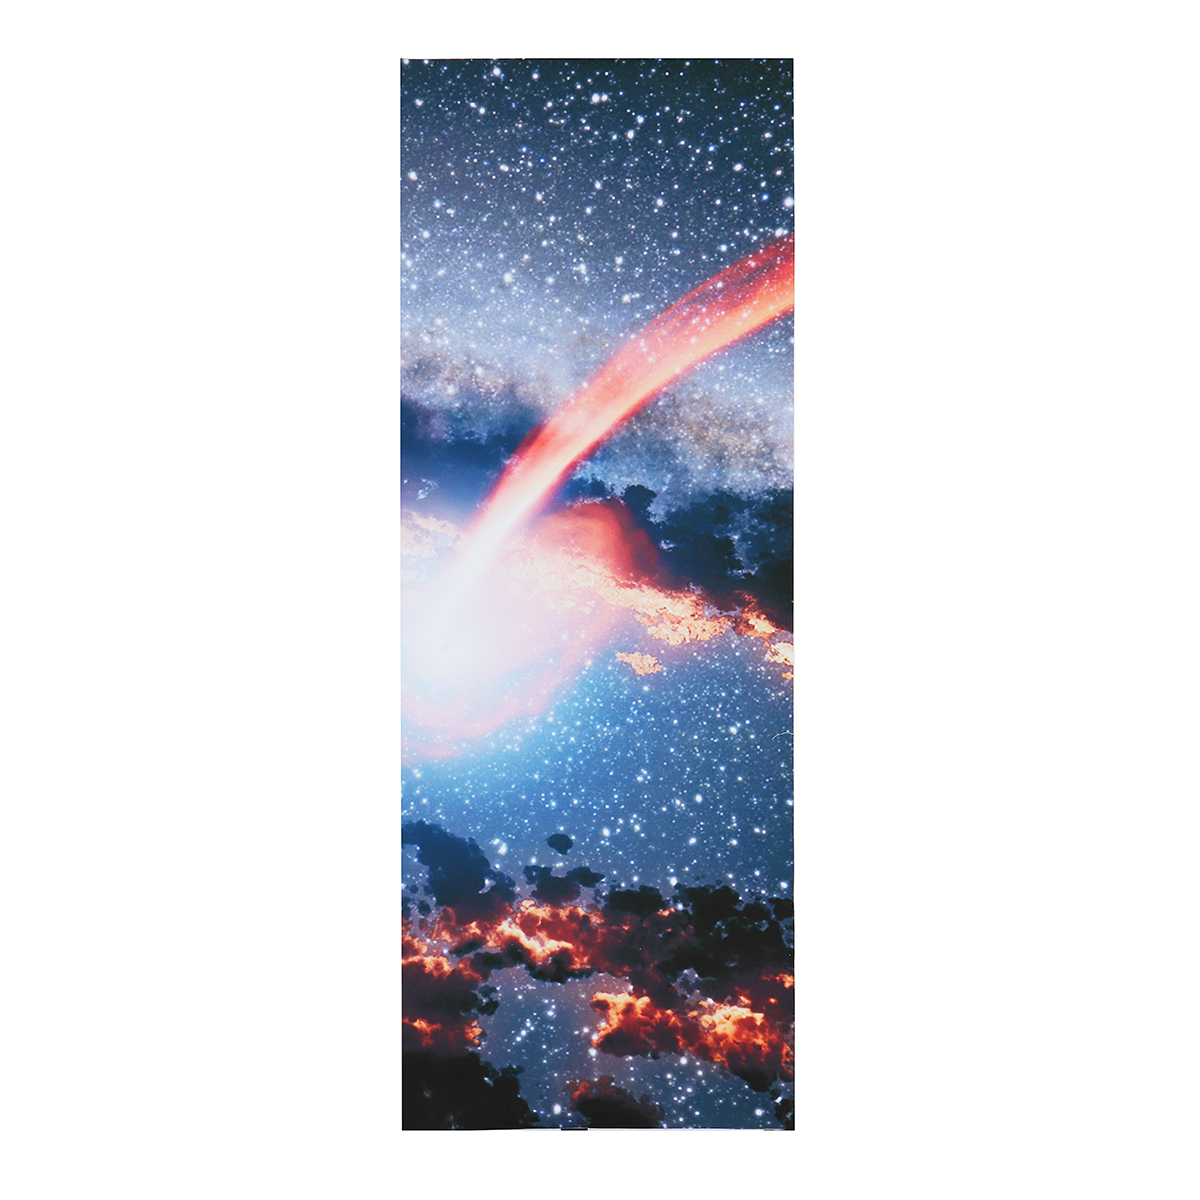 5Pcs-Canvas-Painting-Starry-Sky-Wall-Decorative-Print-Art-Pictures-Frameless-Wall-Hanging-Home-Offic-1803048-7